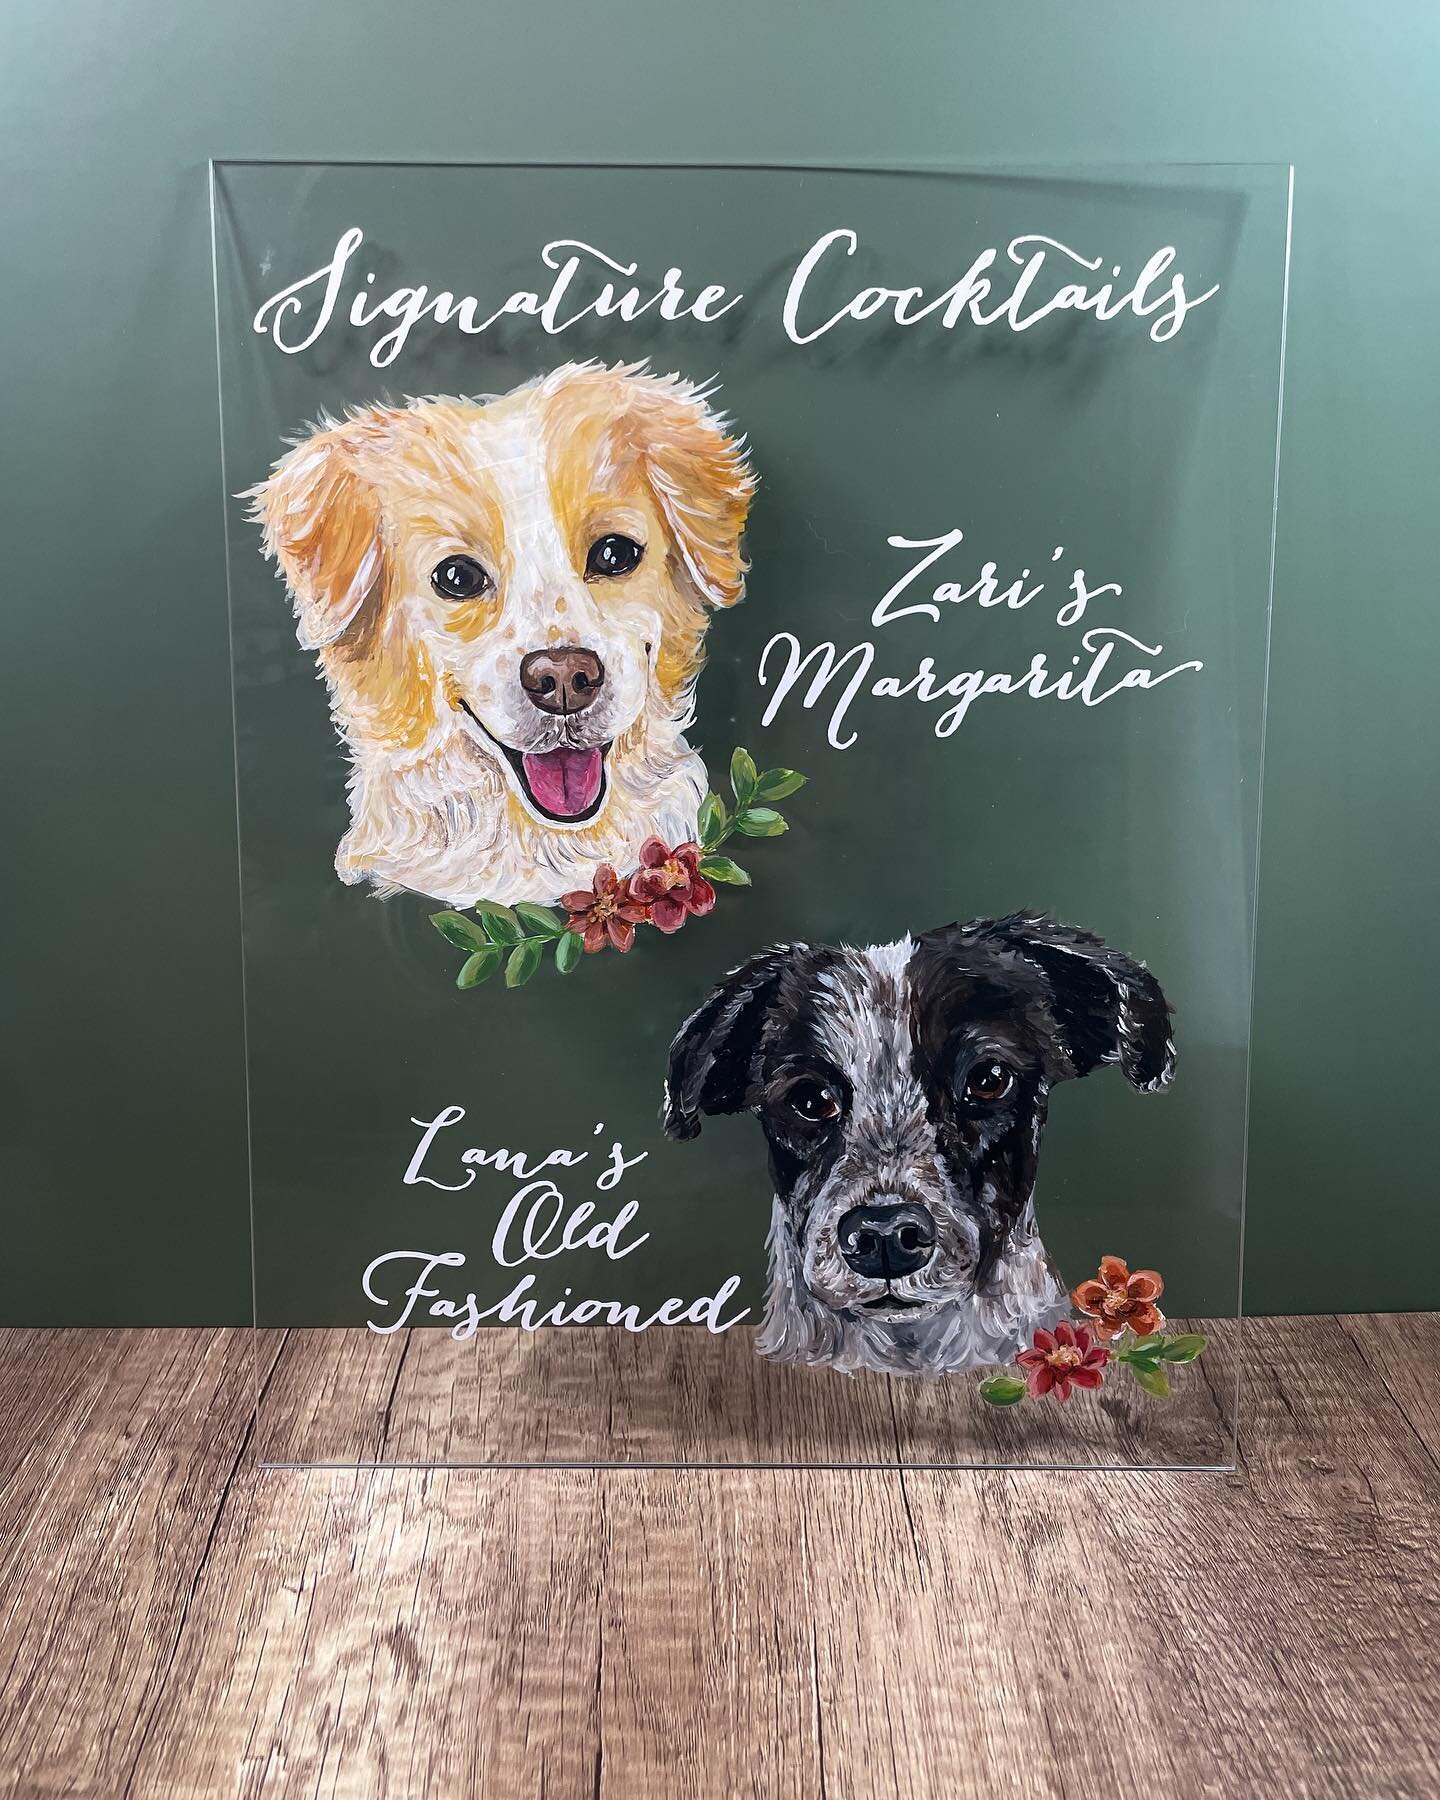 &ldquo;Hollie was amazing to work with from start to finish. She was so accommodating with my requests for details with both of my dogs portraits. The bar sign turned out beautifully and we can&rsquo;t wait to feature it at our wedding!&rdquo;
#weddi